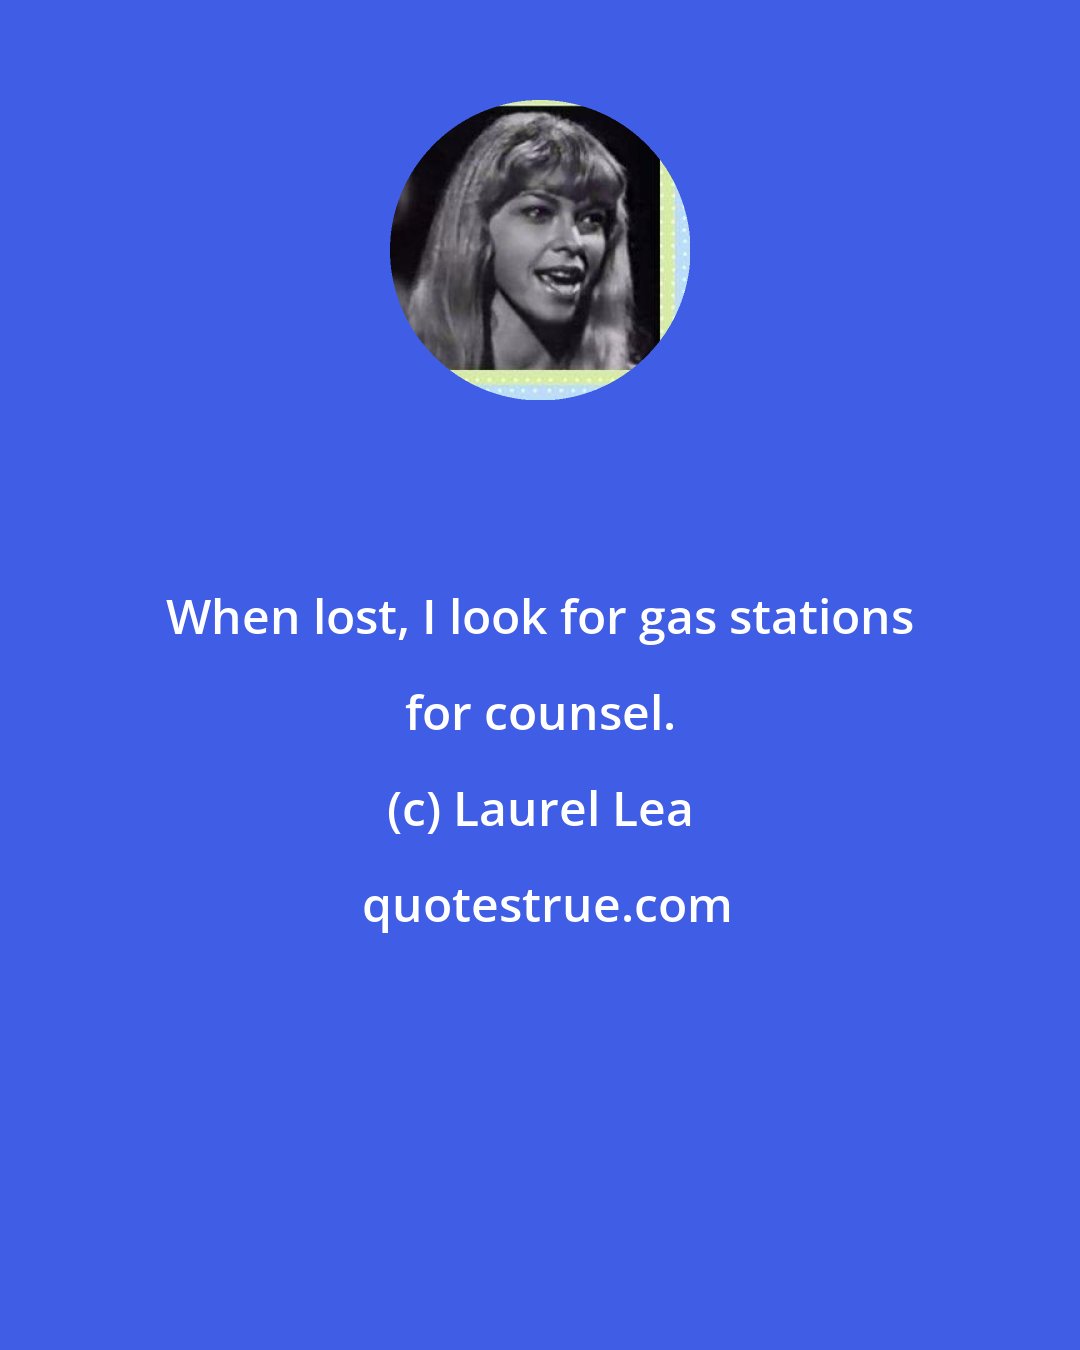 Laurel Lea: When lost, I look for gas stations for counsel.